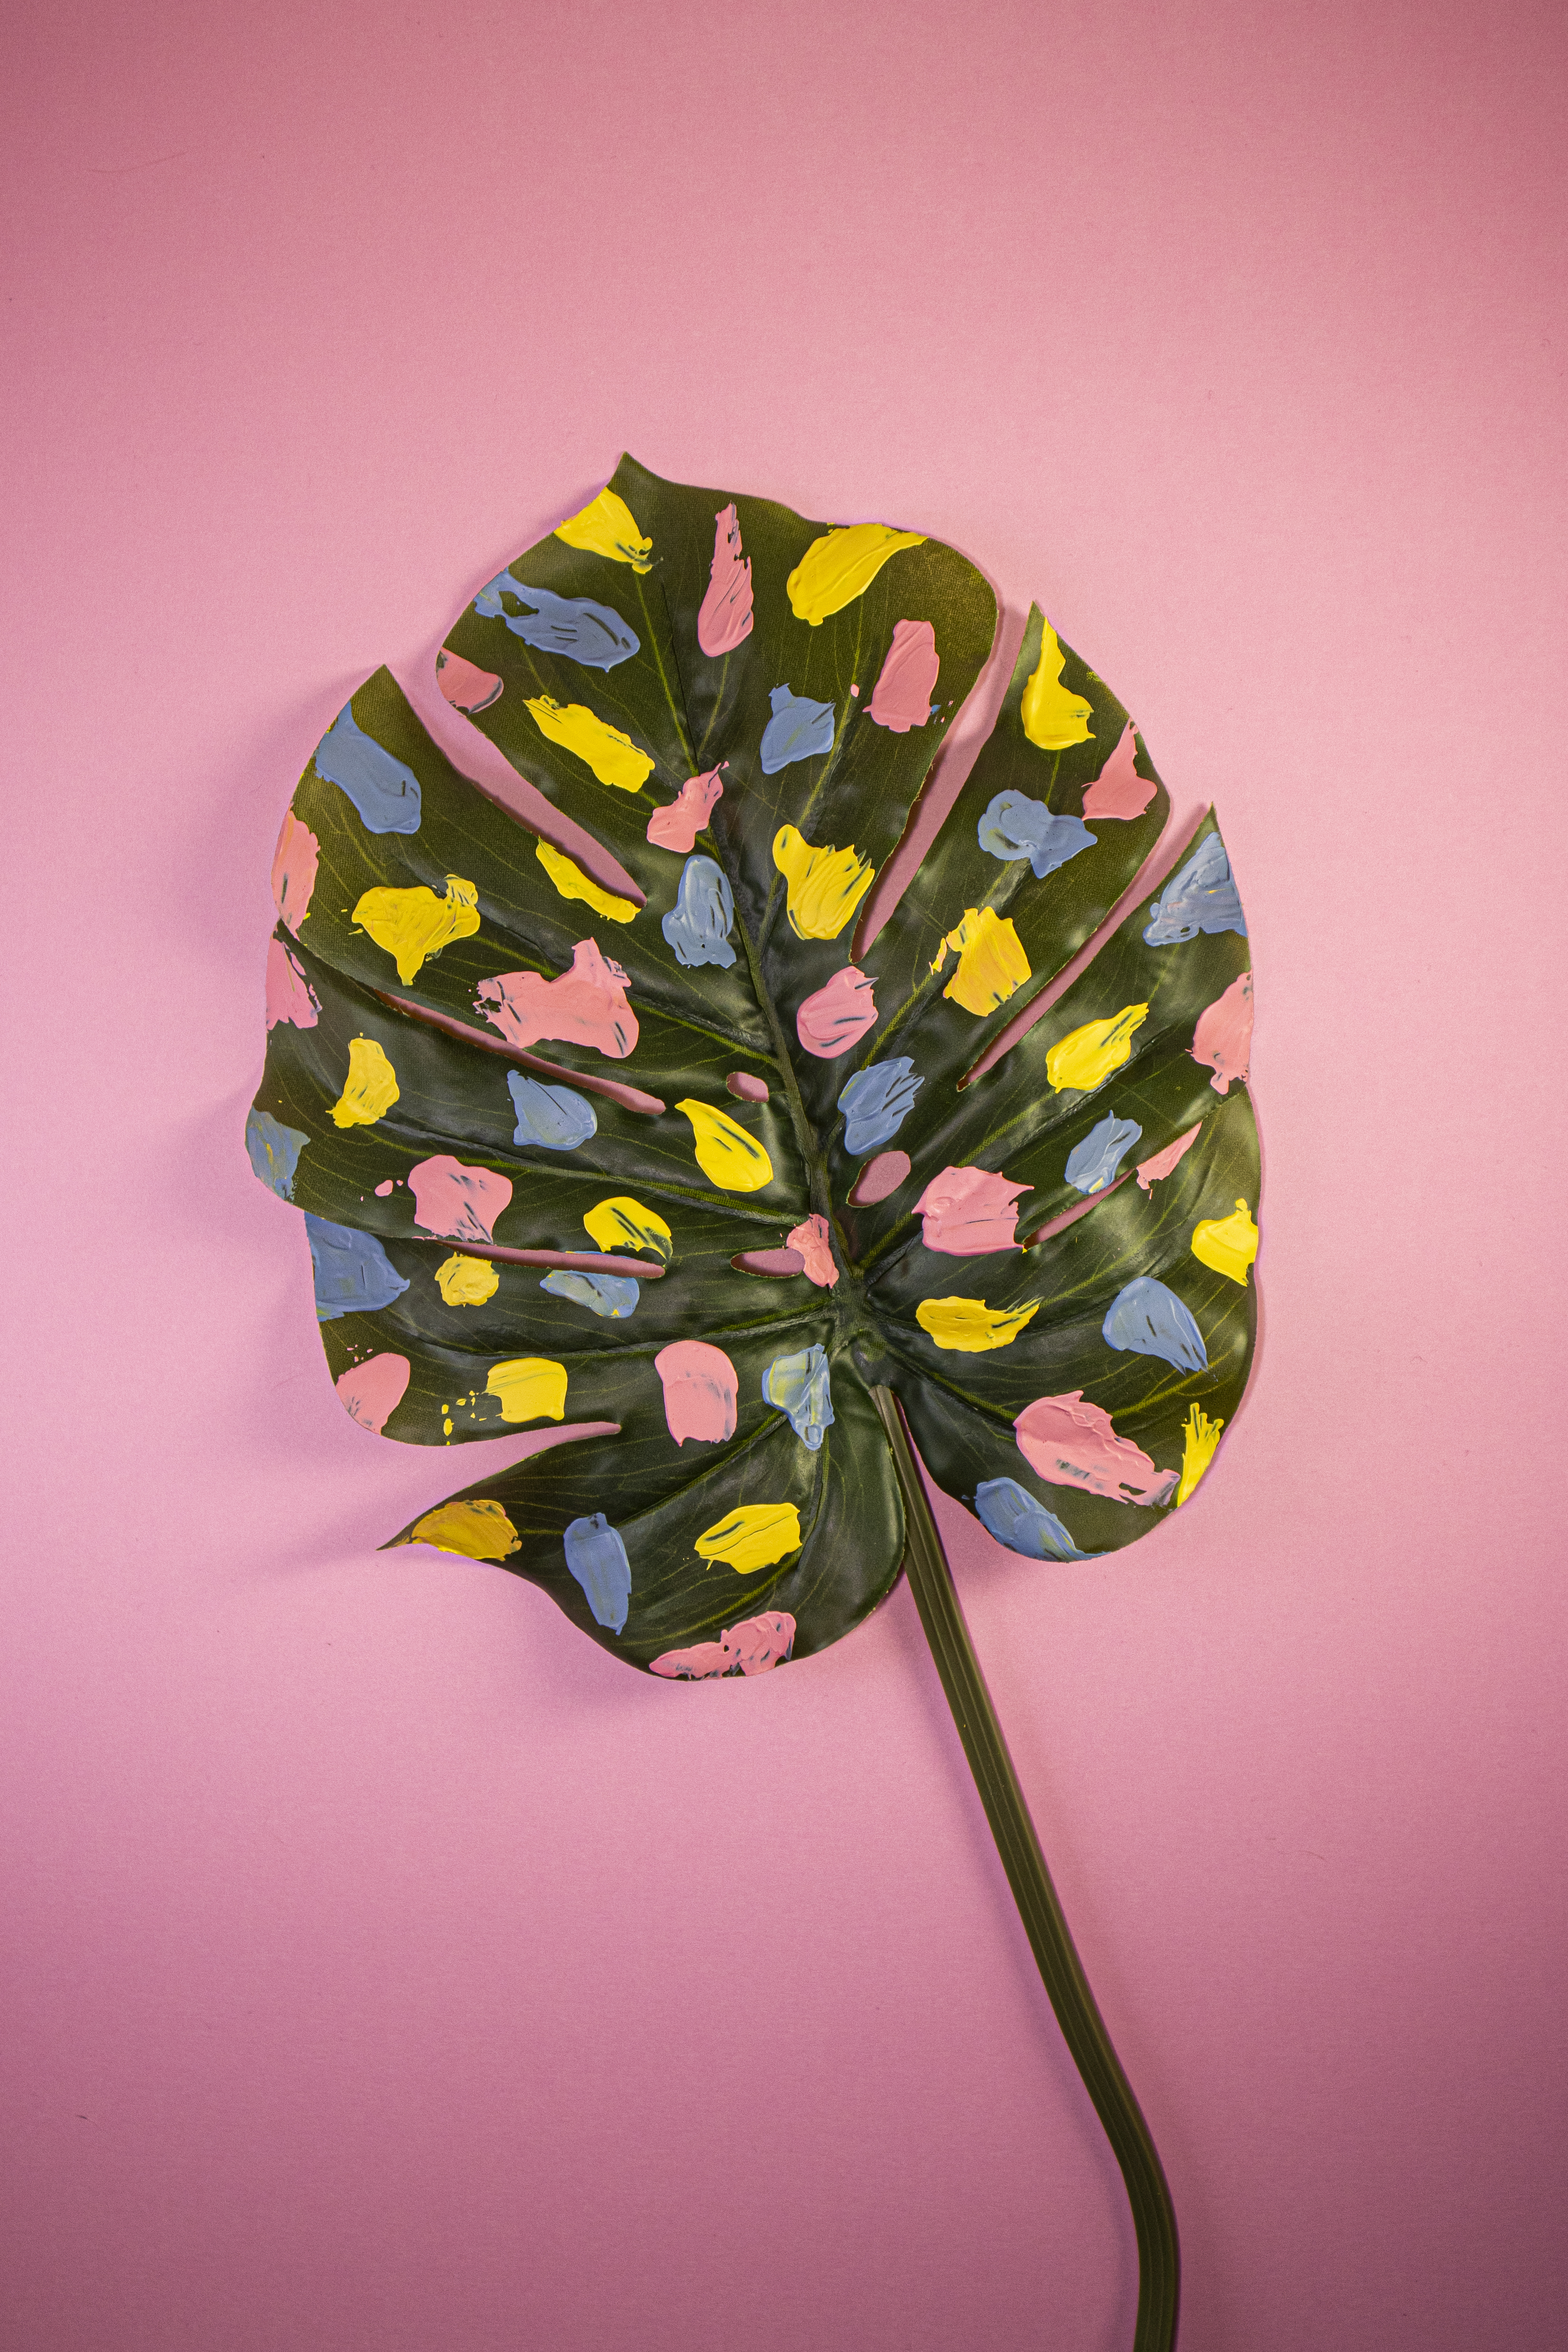 green leaf with pink, yellow and blue splats of paint on leaf with pink background